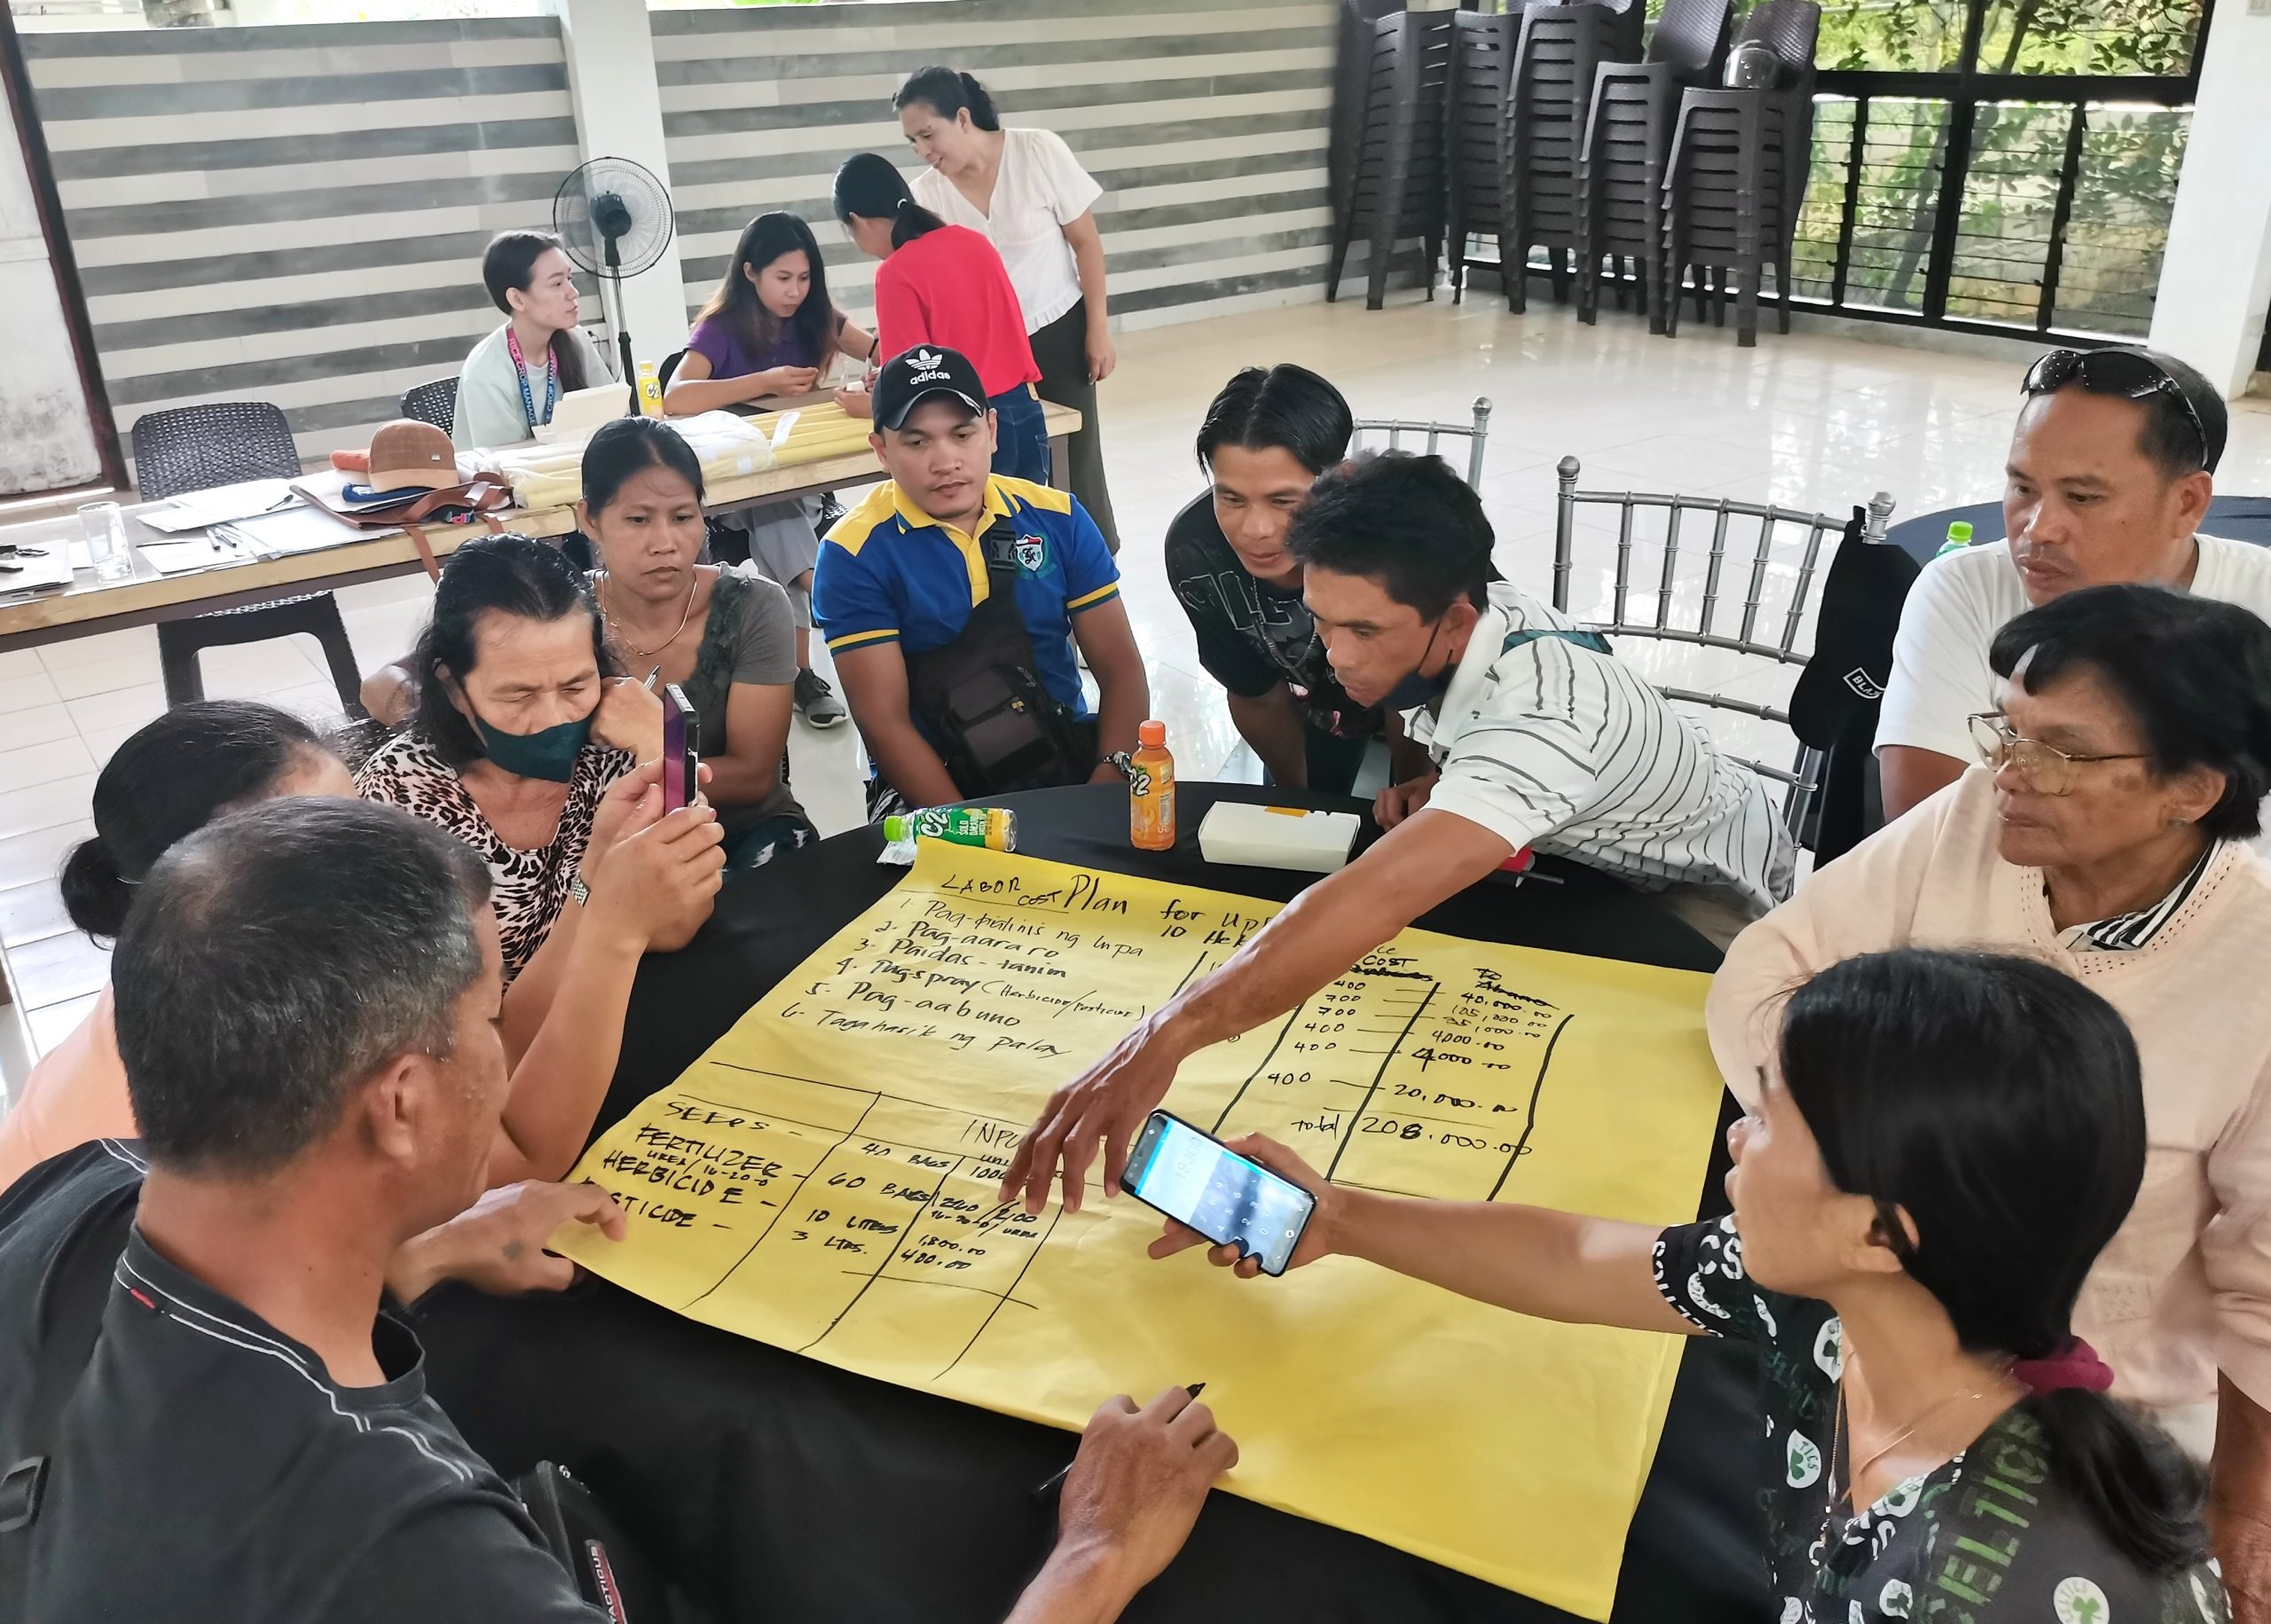 SAAD MIMAROPA conducts various training on crop, livestock production to 26 FAs in Romblon